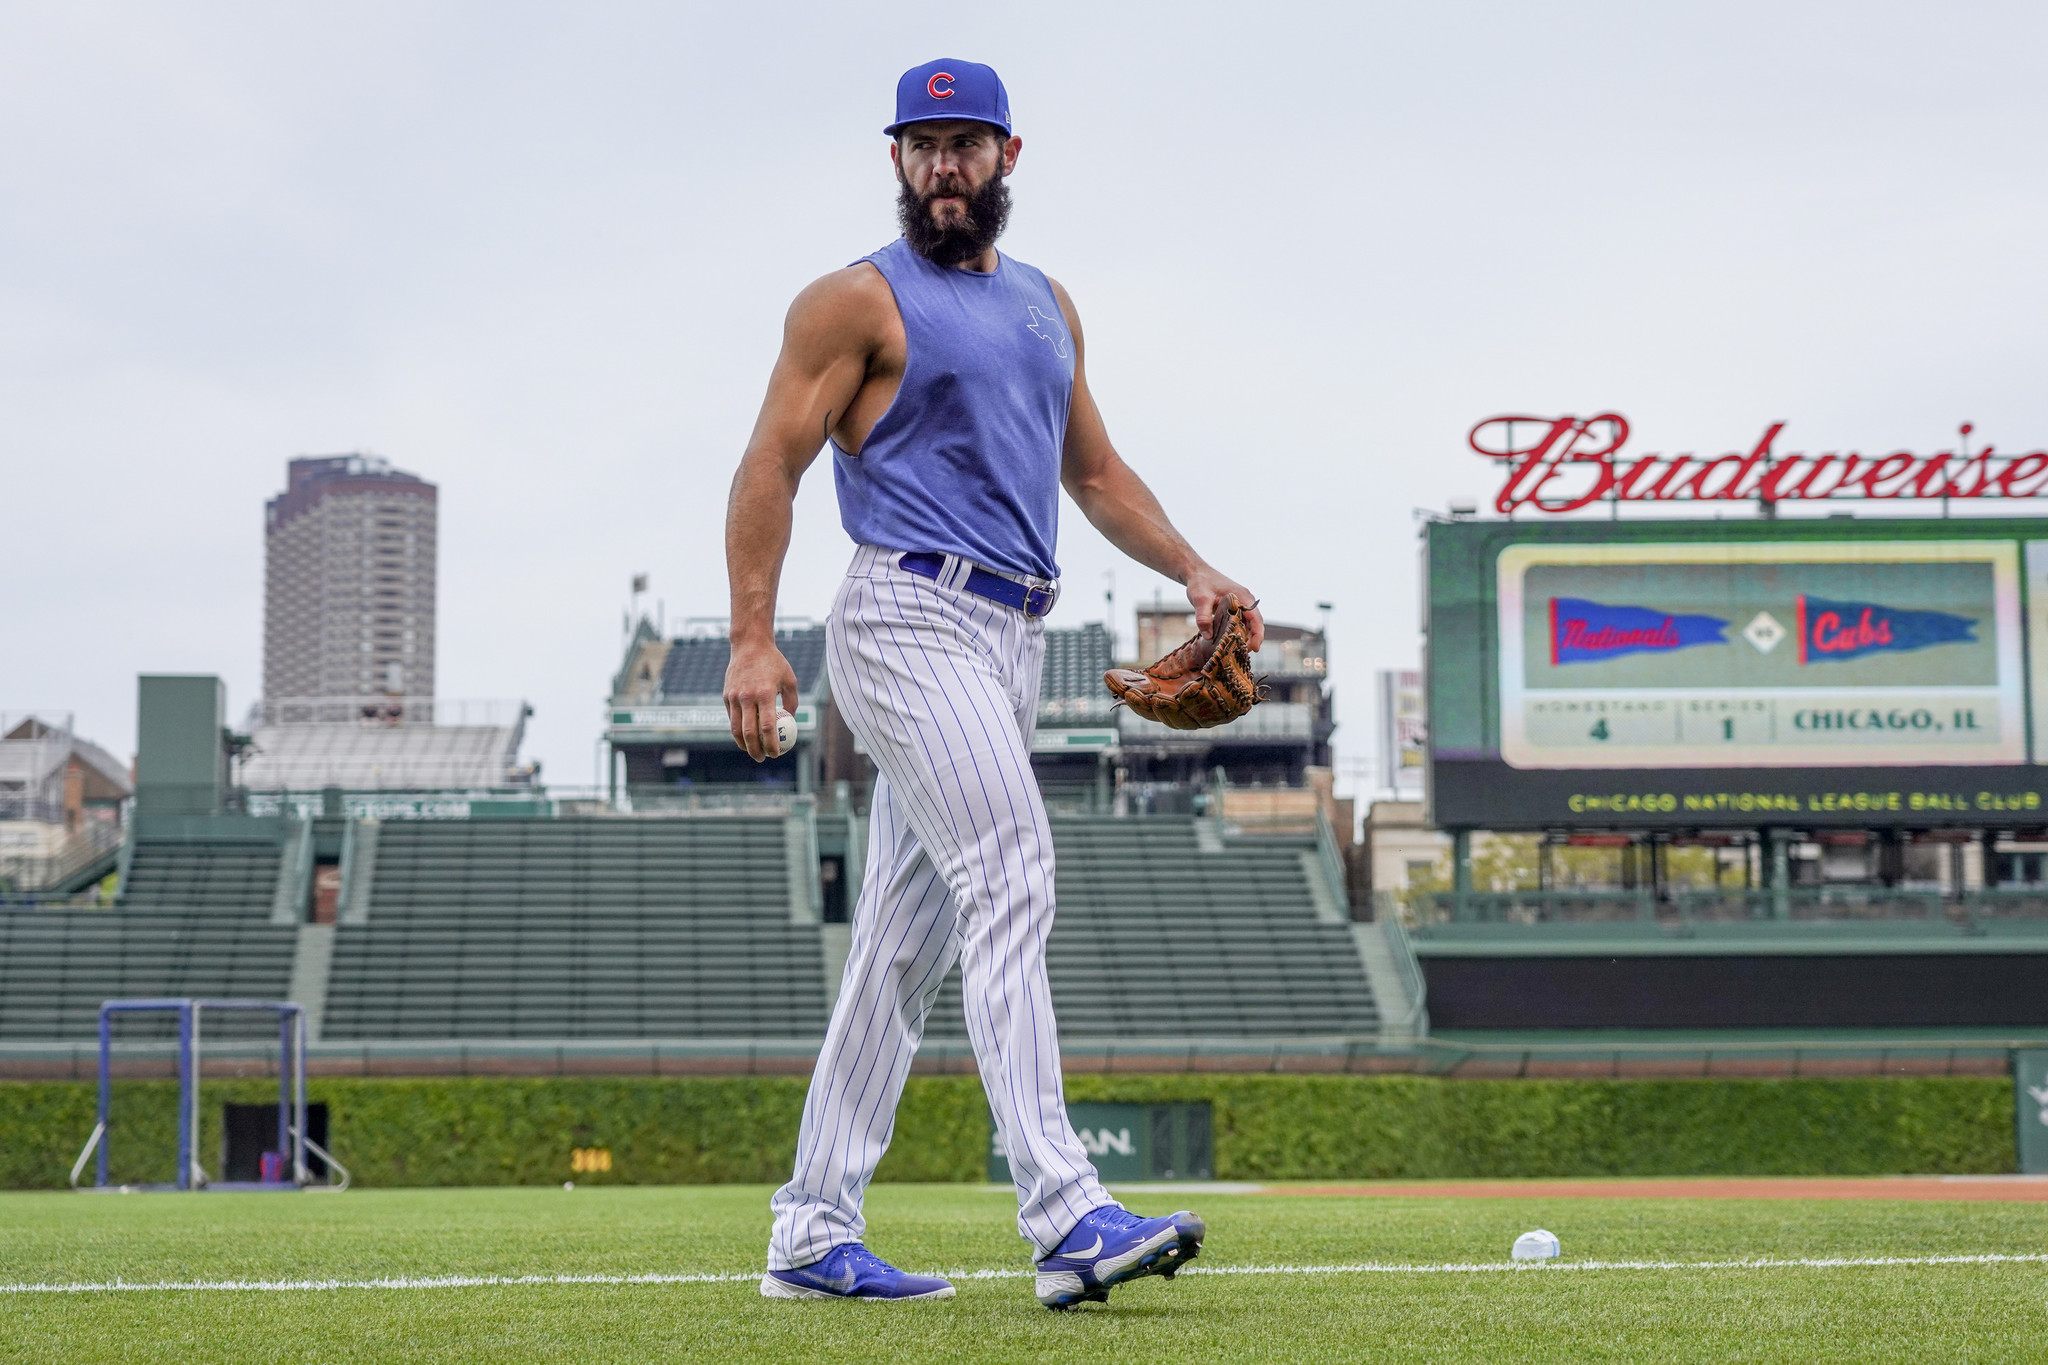 This is a 2021 photo of Jake Arrieta of the Chicago Cubs baseball